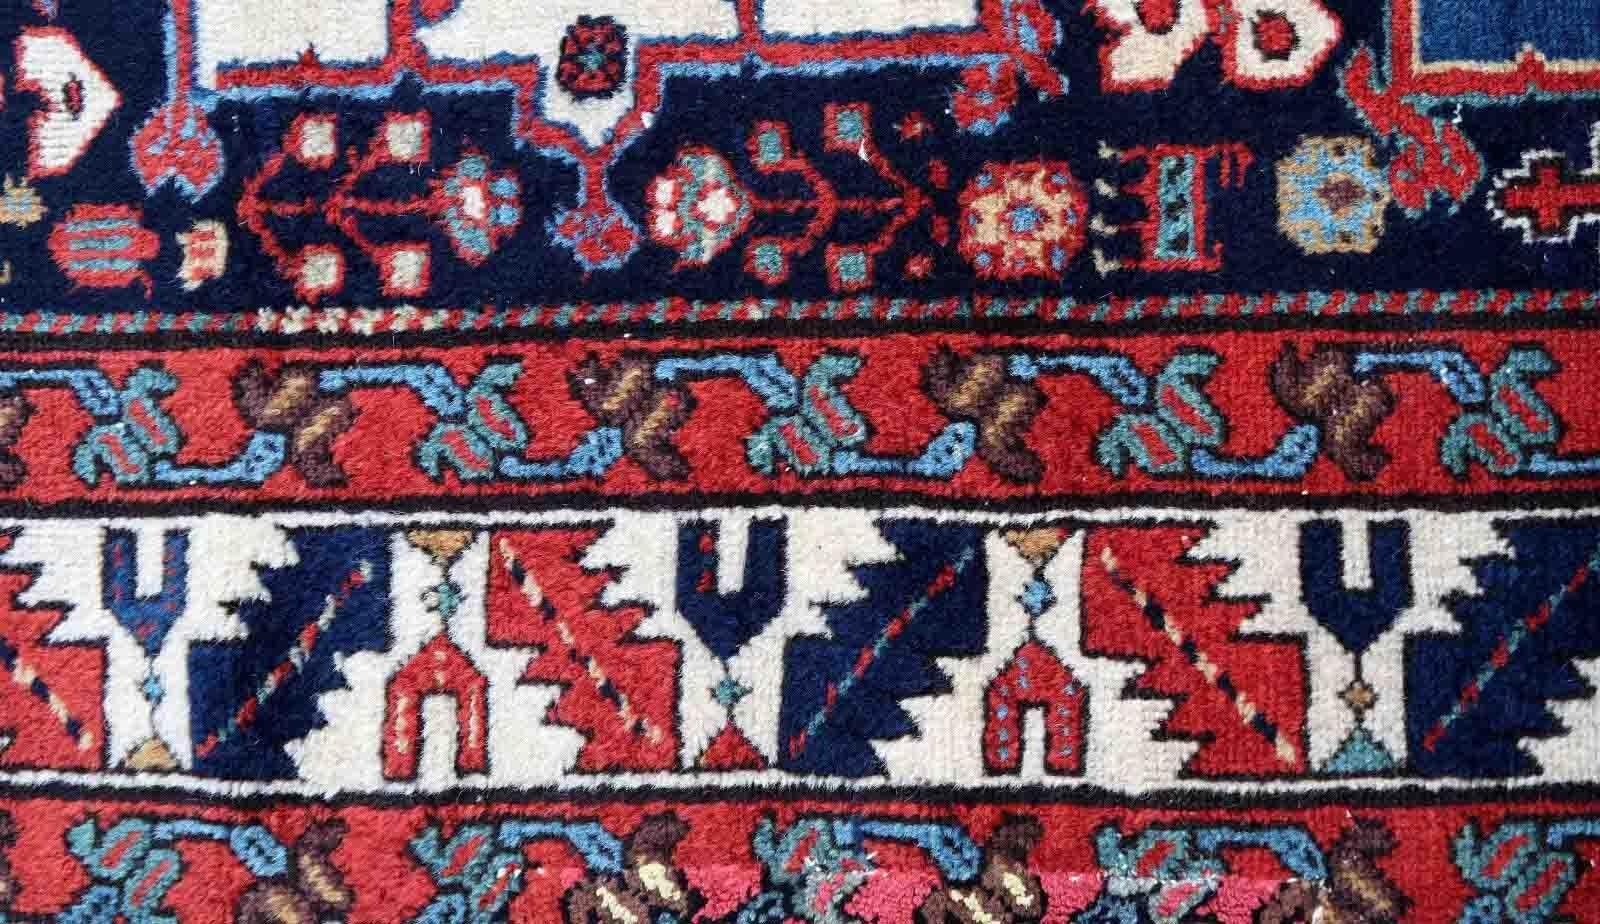 Handmade antique Karajeh rug in bright colors. This collectible rug is from the middle of 19th century in original condition, it has some old restorations.

-condition: good, some old restorations,

-circa: 1850s,

-size: 3.6' x 9.2' (110cm x